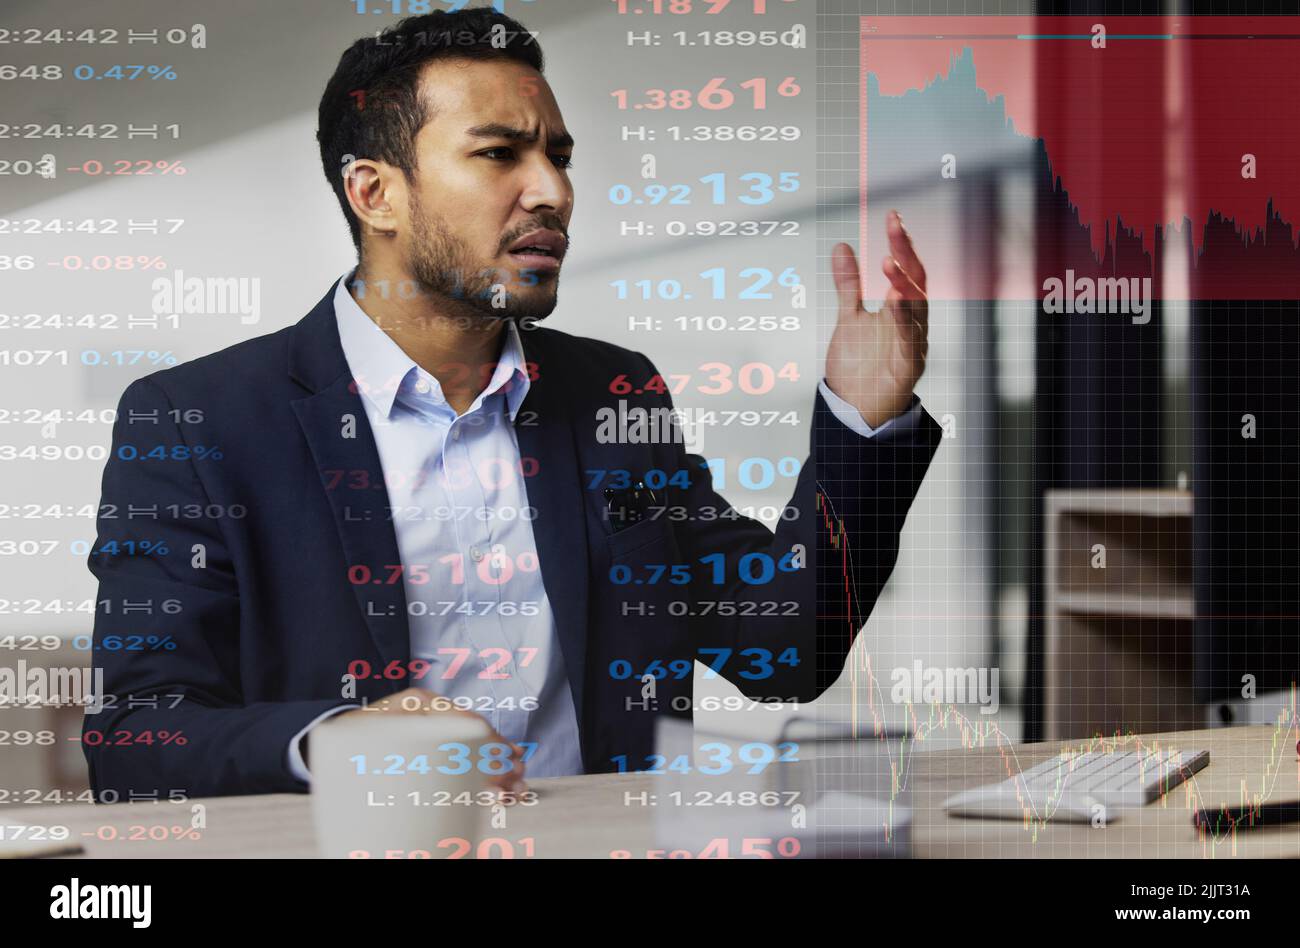 Stressed and angry businessman, trading on the stock market during a financial crisis. Trader in a bear market with stocks crashing showing red Stock Photo